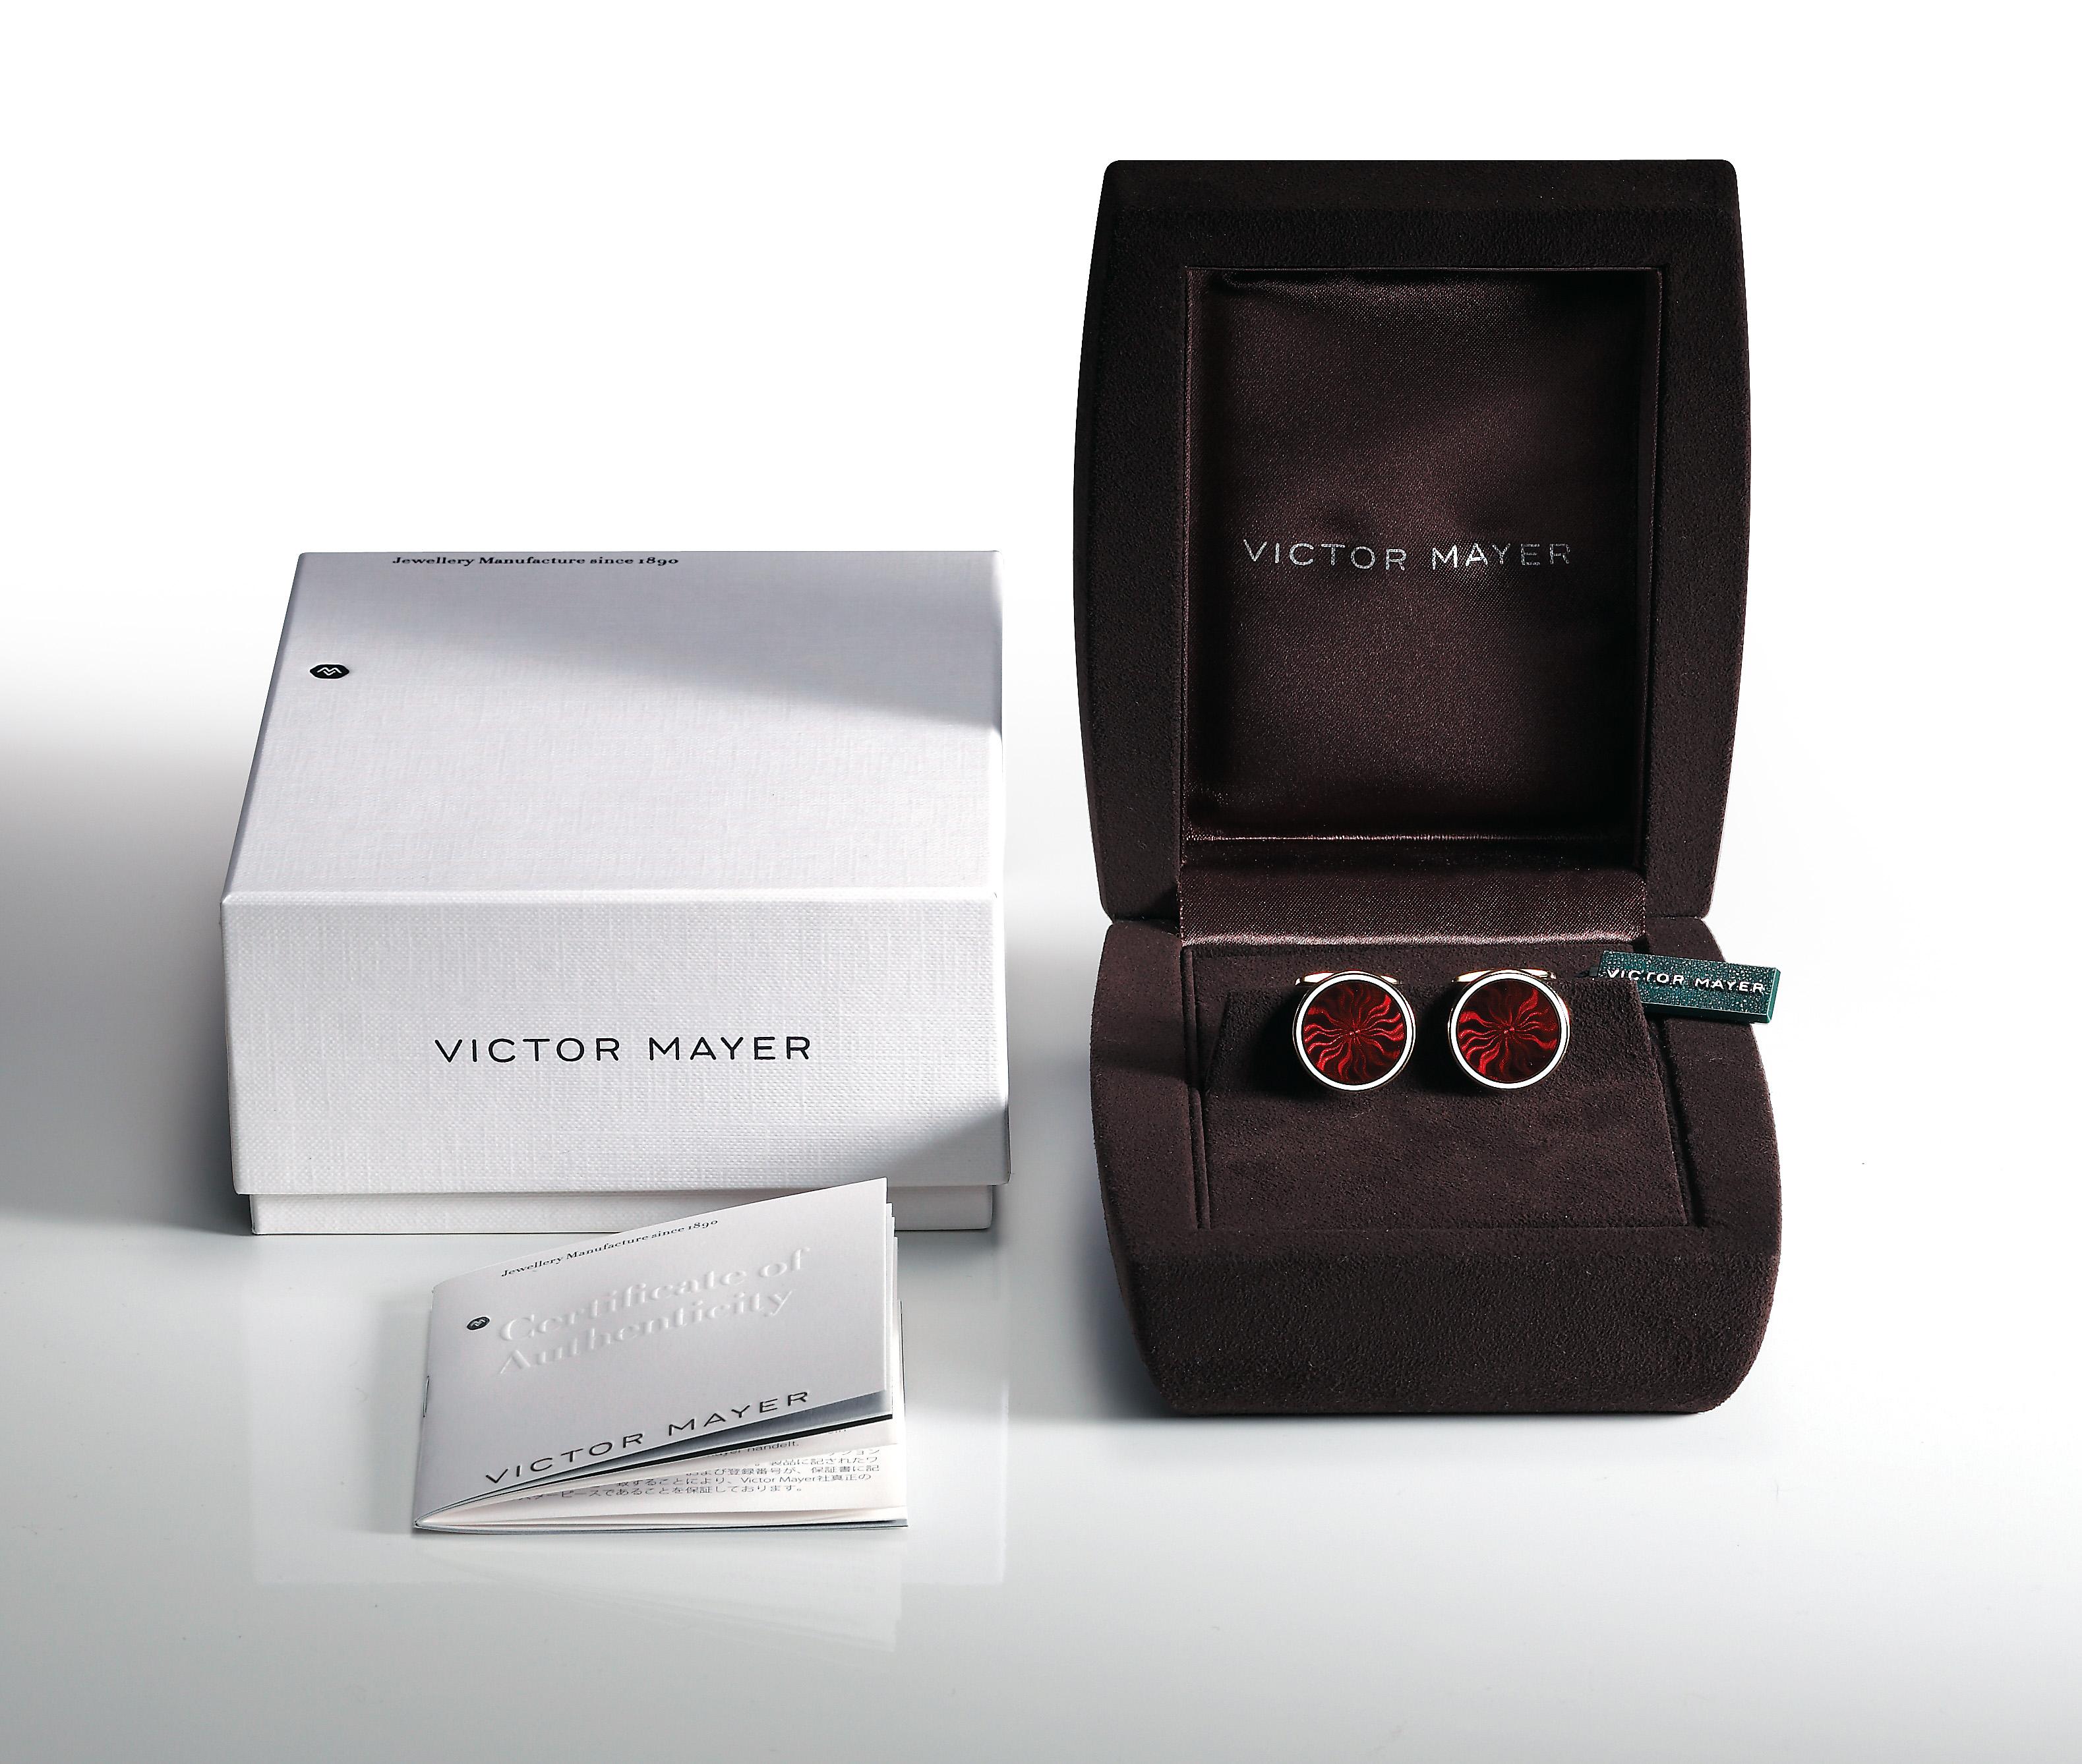 Round Cufflinks, Hallmark Collection by Victor Mayer, 18k Rose Gold, Black Mother of Pearl (Tahiti), Diameter 20.0 mm

About the creator Victor Mayer
Victor Mayer is internationally renowned for elegant timeless designs and unrivalled expertise in